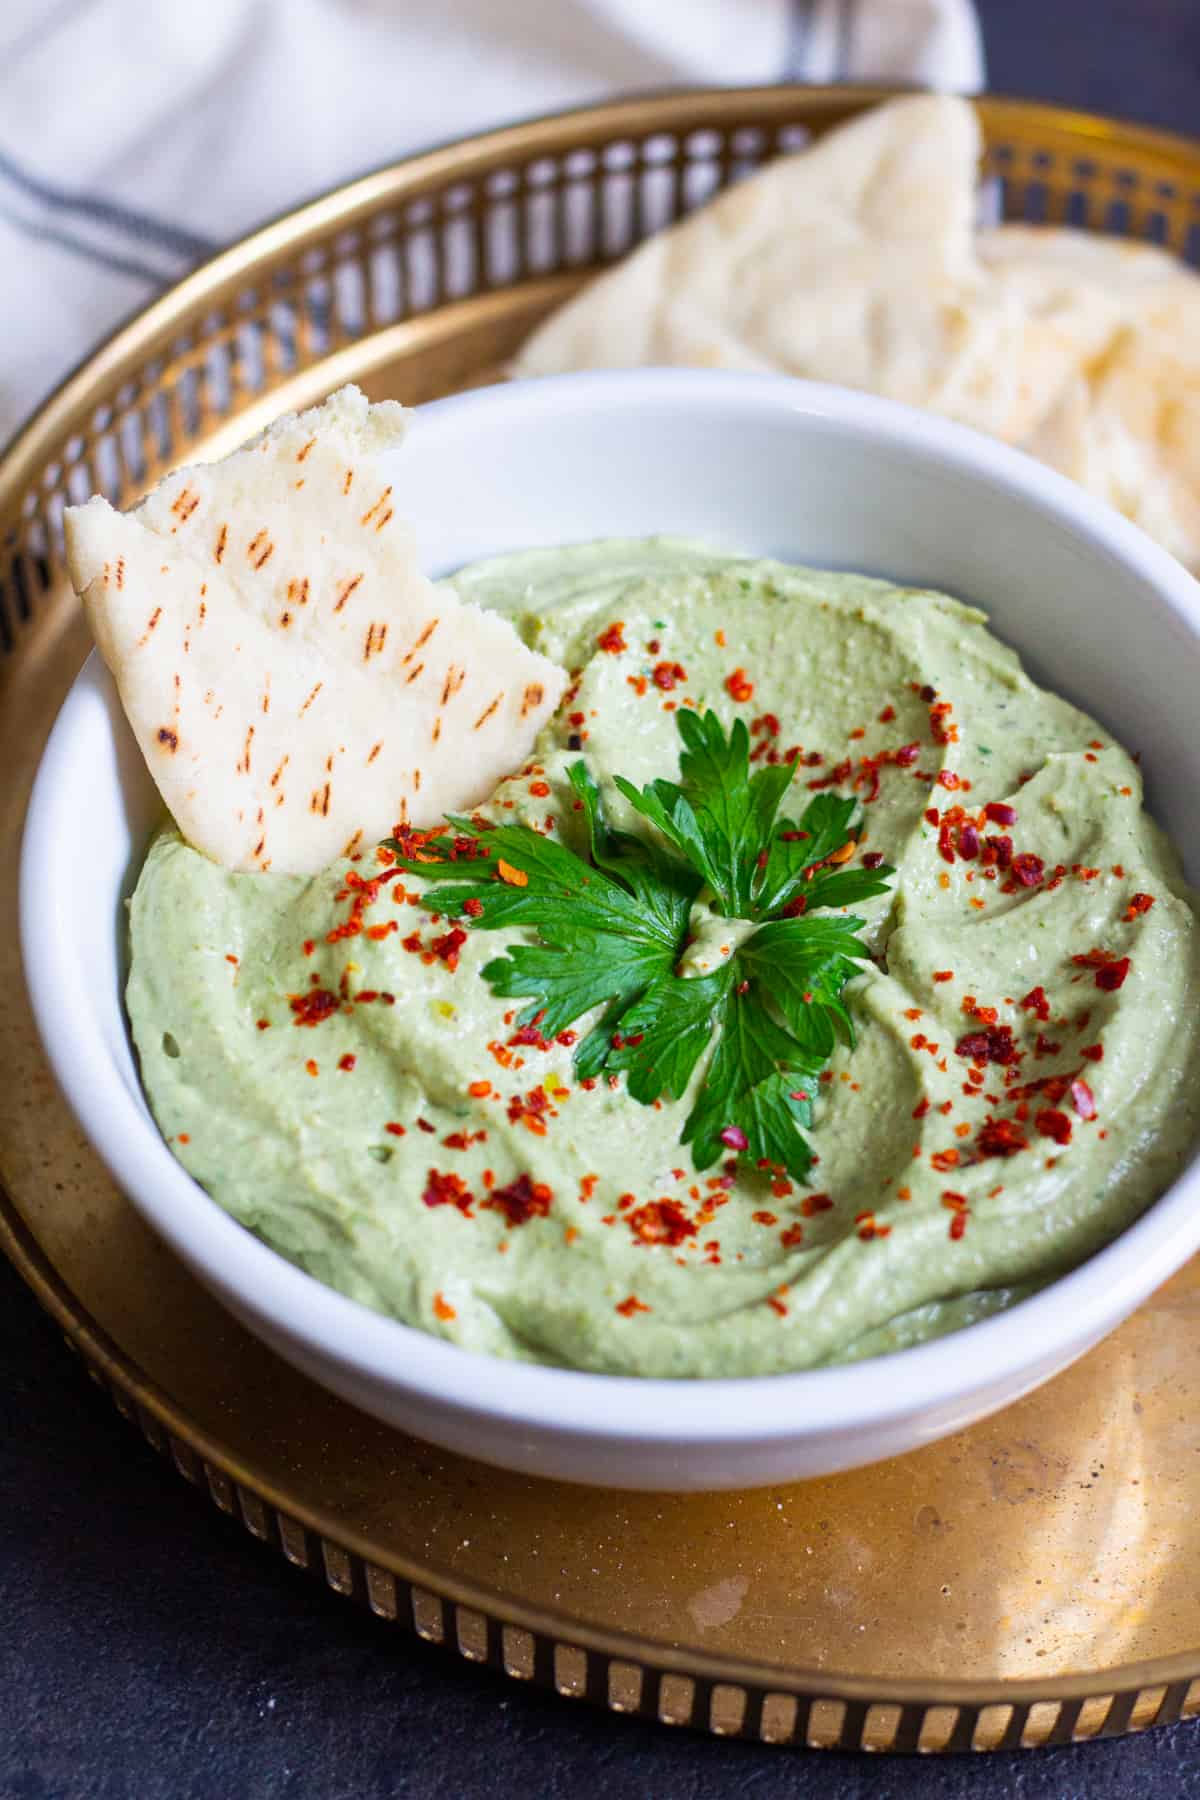 Top pistachio avocado dip with parsley and red pepper flakes. 